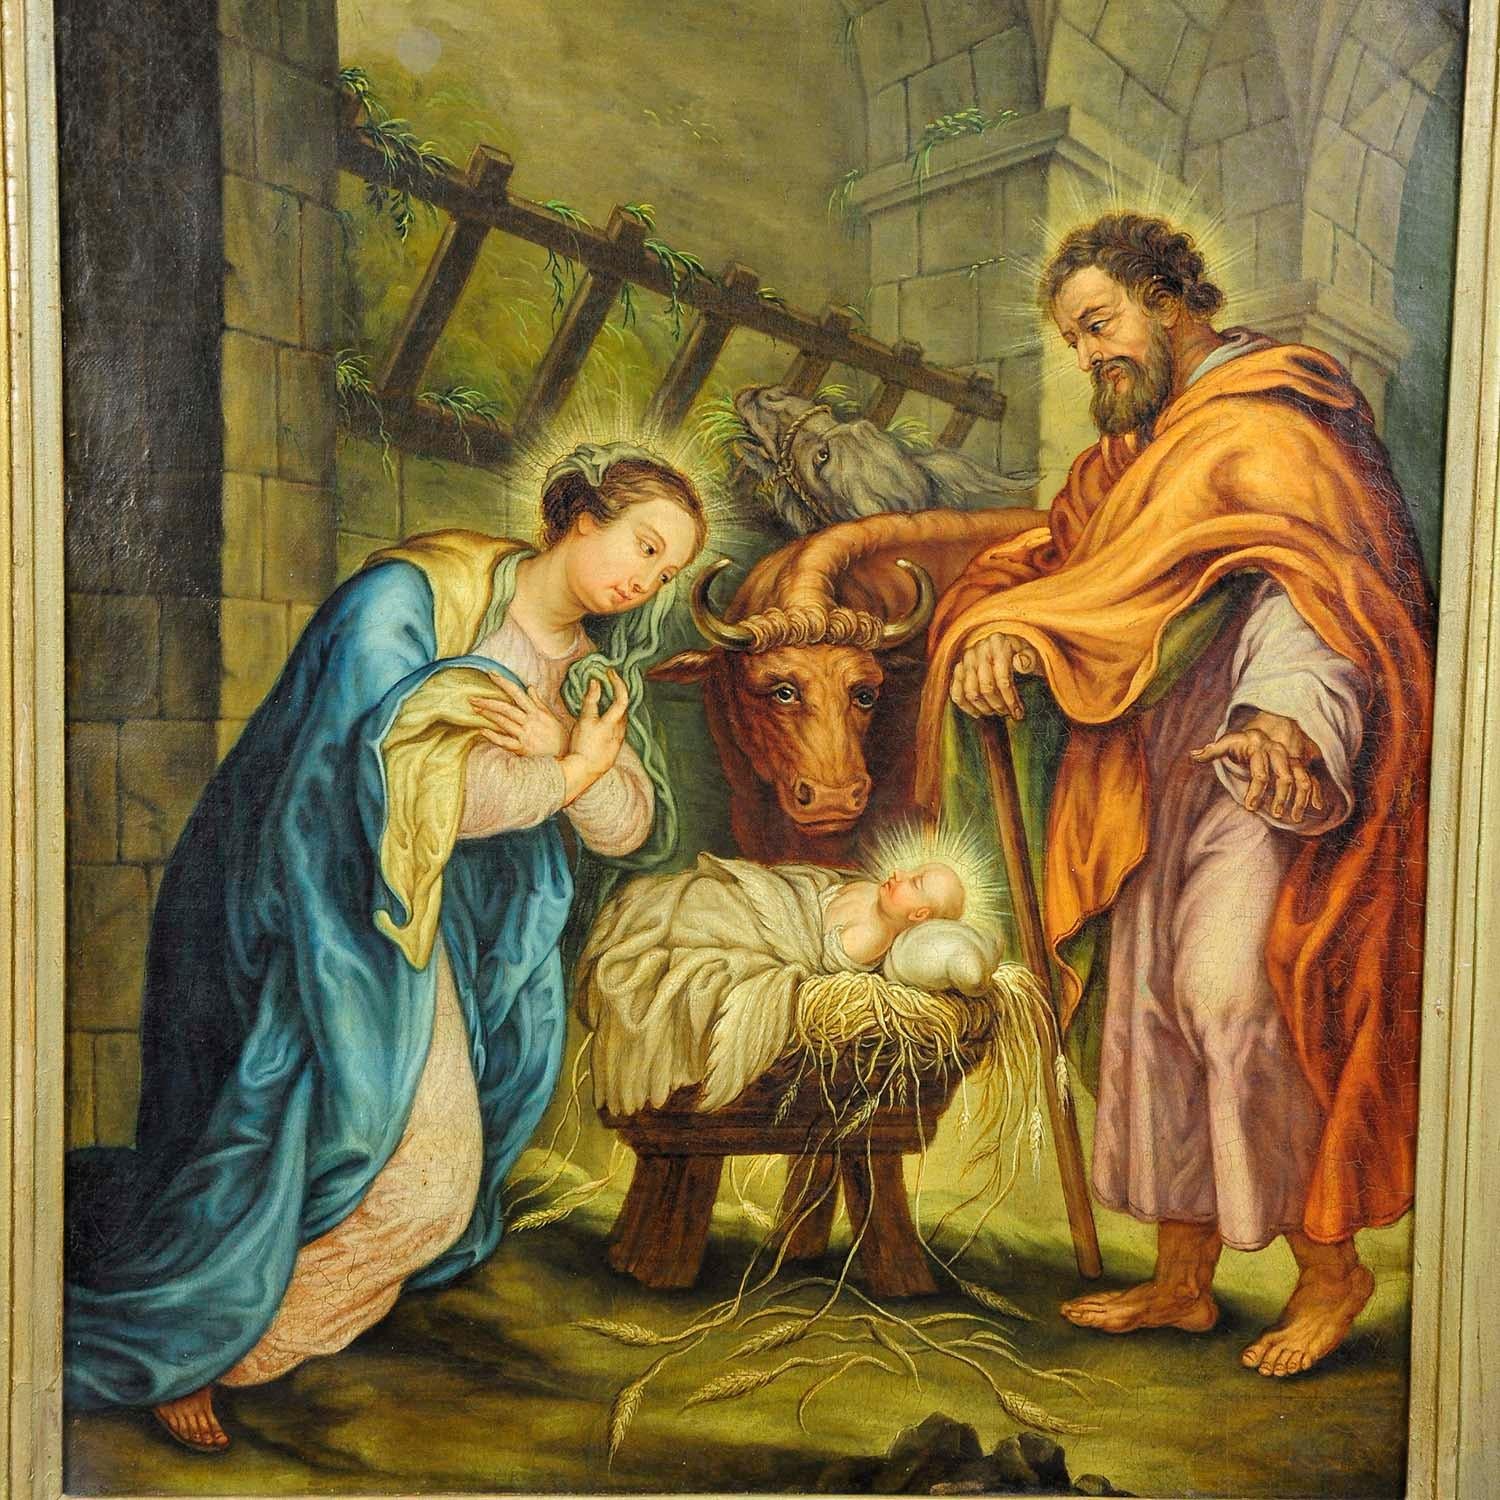 A naturalistic oil painting depicting joseph, maria and the holy child in the barn of bethlehem. Oil painting on canvas with vigorous pastell colors. Framed with antique decorative gilded frame. Unsigned, Germany, Bavaria early 20th